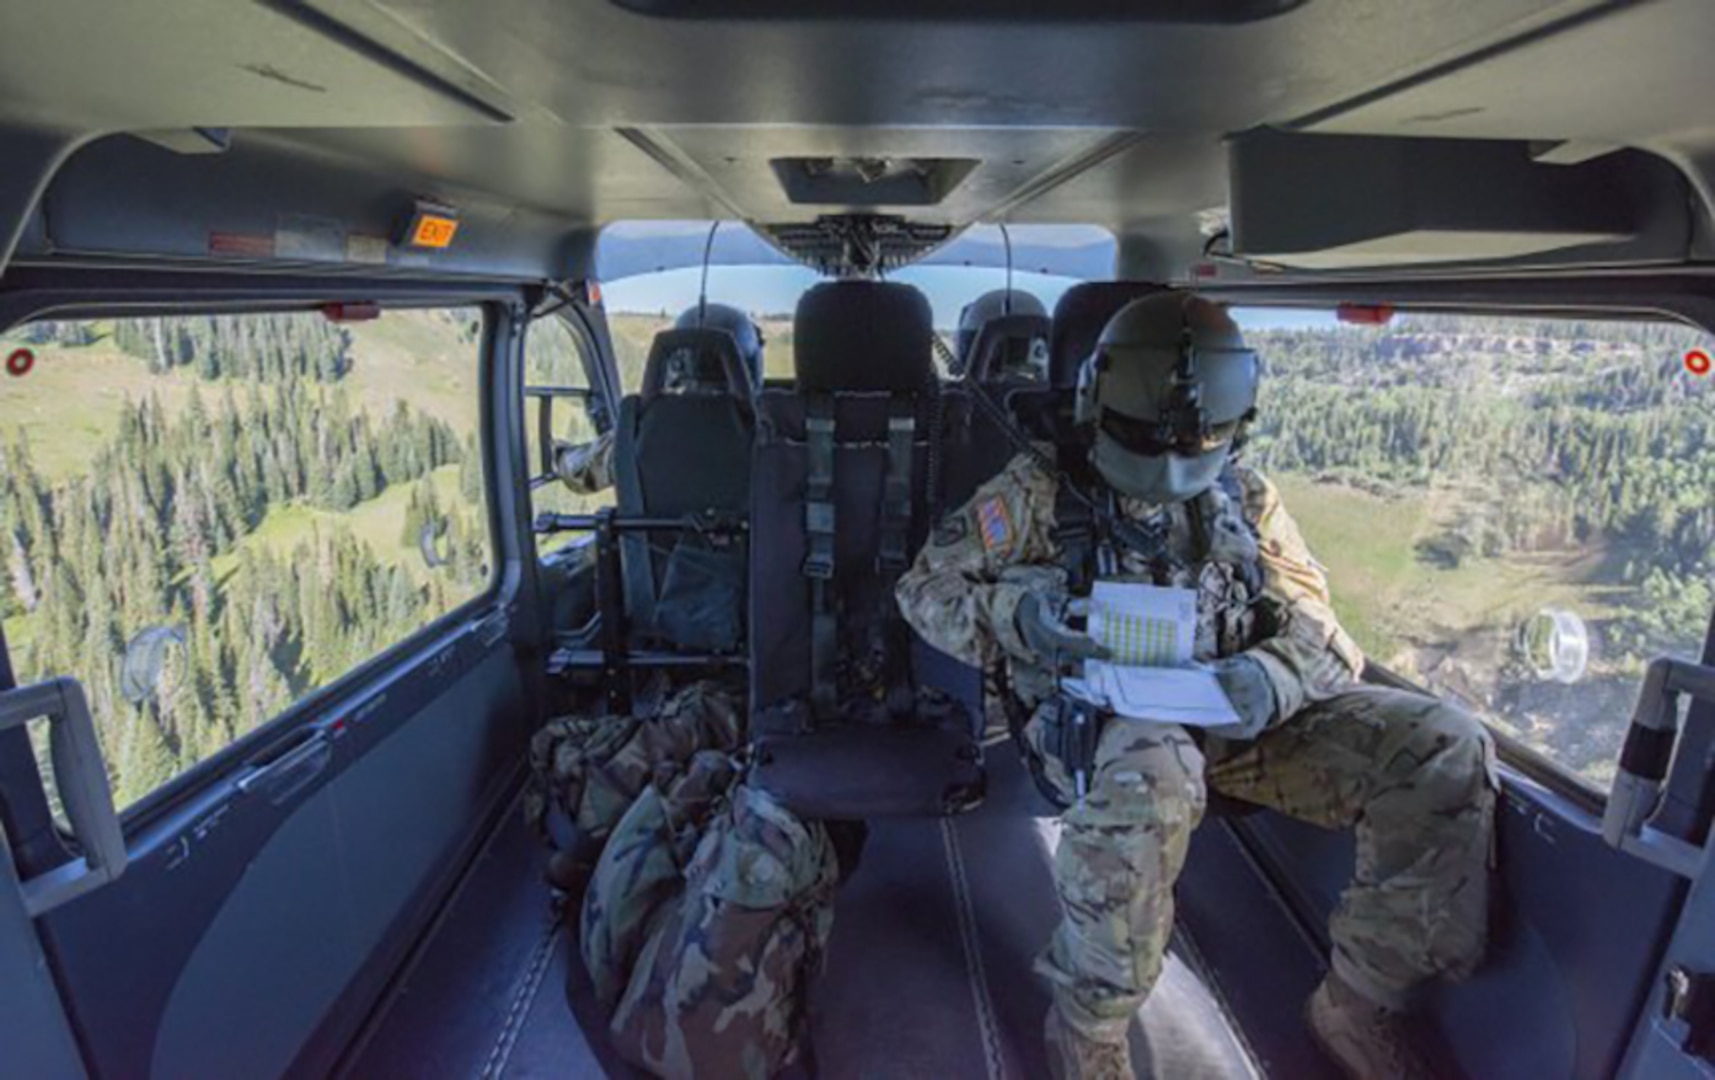 Students take their first flight during weeklong training at the High-Altitude Army National Guard Aviation Training Site in Gypsum, Colo., Aug. 27, 2019. HAATS instructs about 350 students per year across the U.S. military as well as from foreign militaries. It is mainly run by Colorado Army National Guard Soldiers.